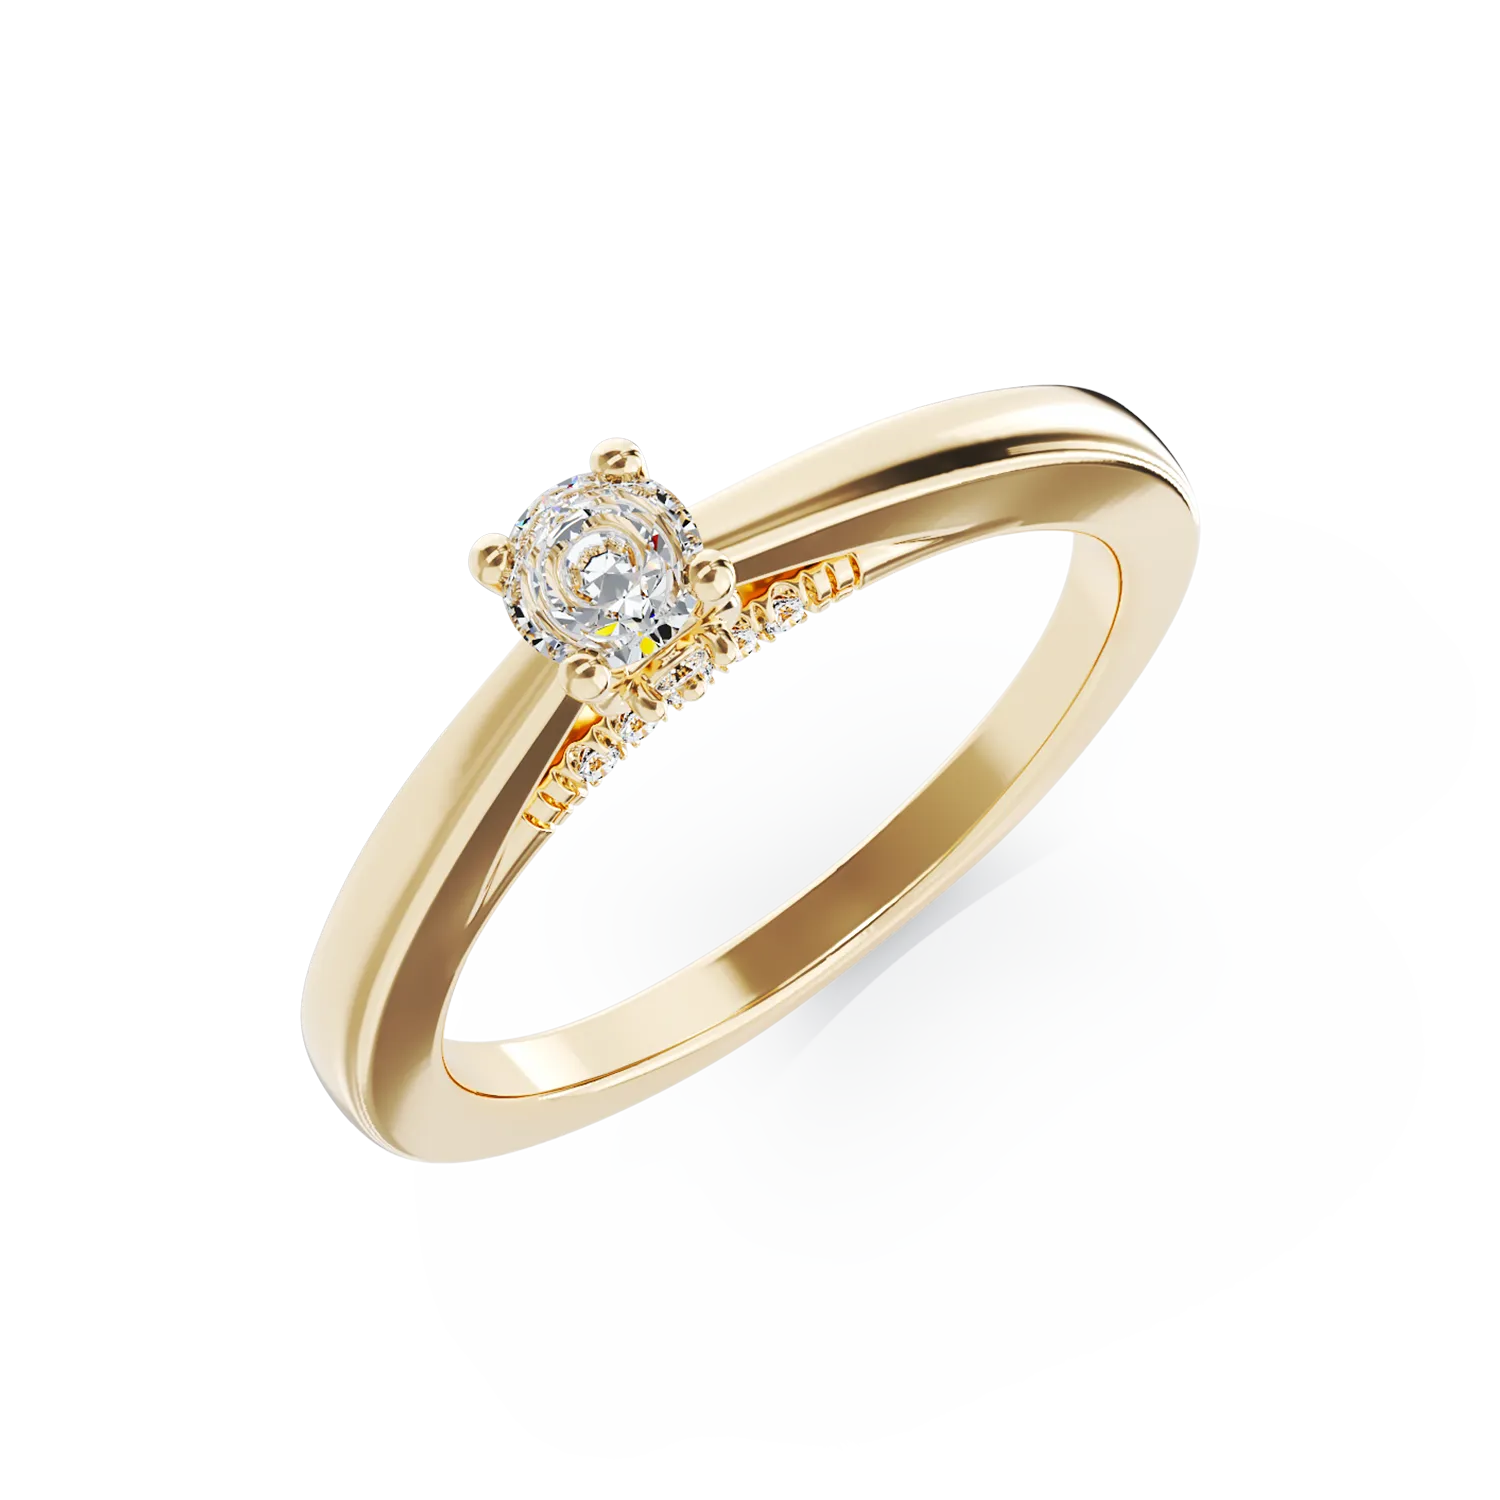 18K yellow gold engagement ring with 0.19ct diamond and 0.05ct diamonds